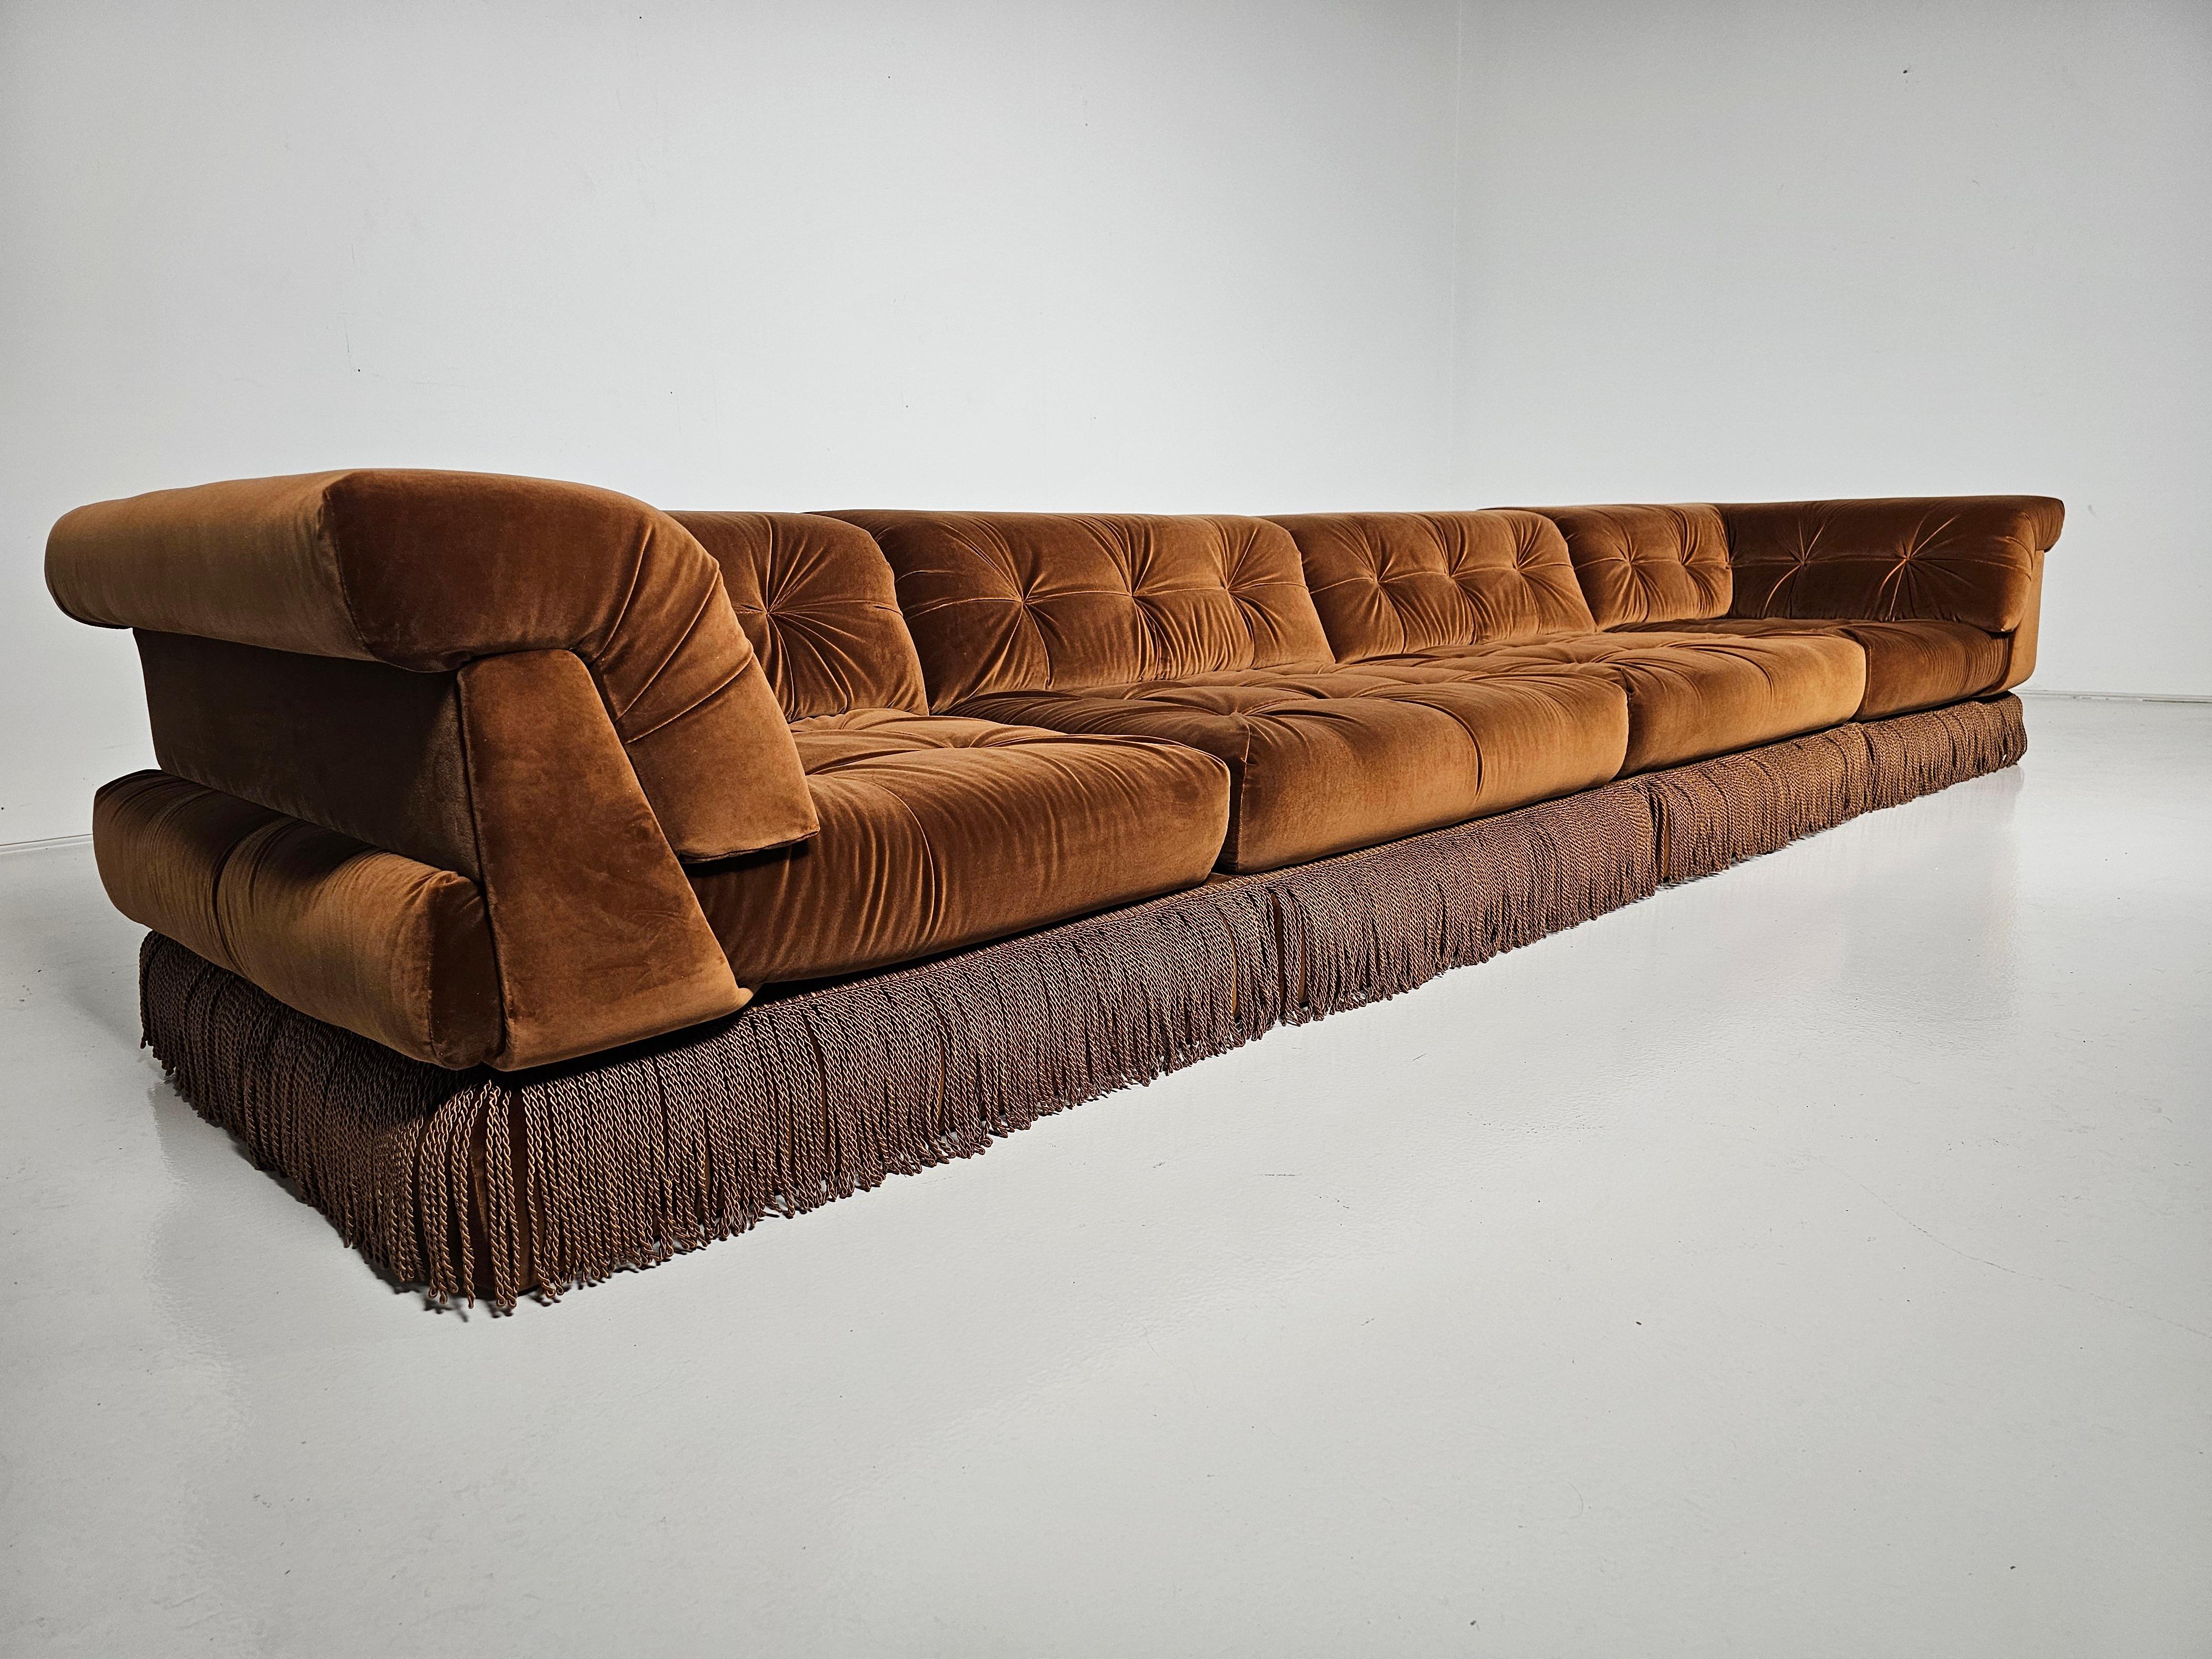 1st edition  Mah Jong modular sofa set by Hans Hopfer, designed in 1971 for Roche Bobois. It features multiple cushions that can be arranged in an endless number of ways, This set includes 8 cushions and 4 backrests.  Reupholstered in caramel brown